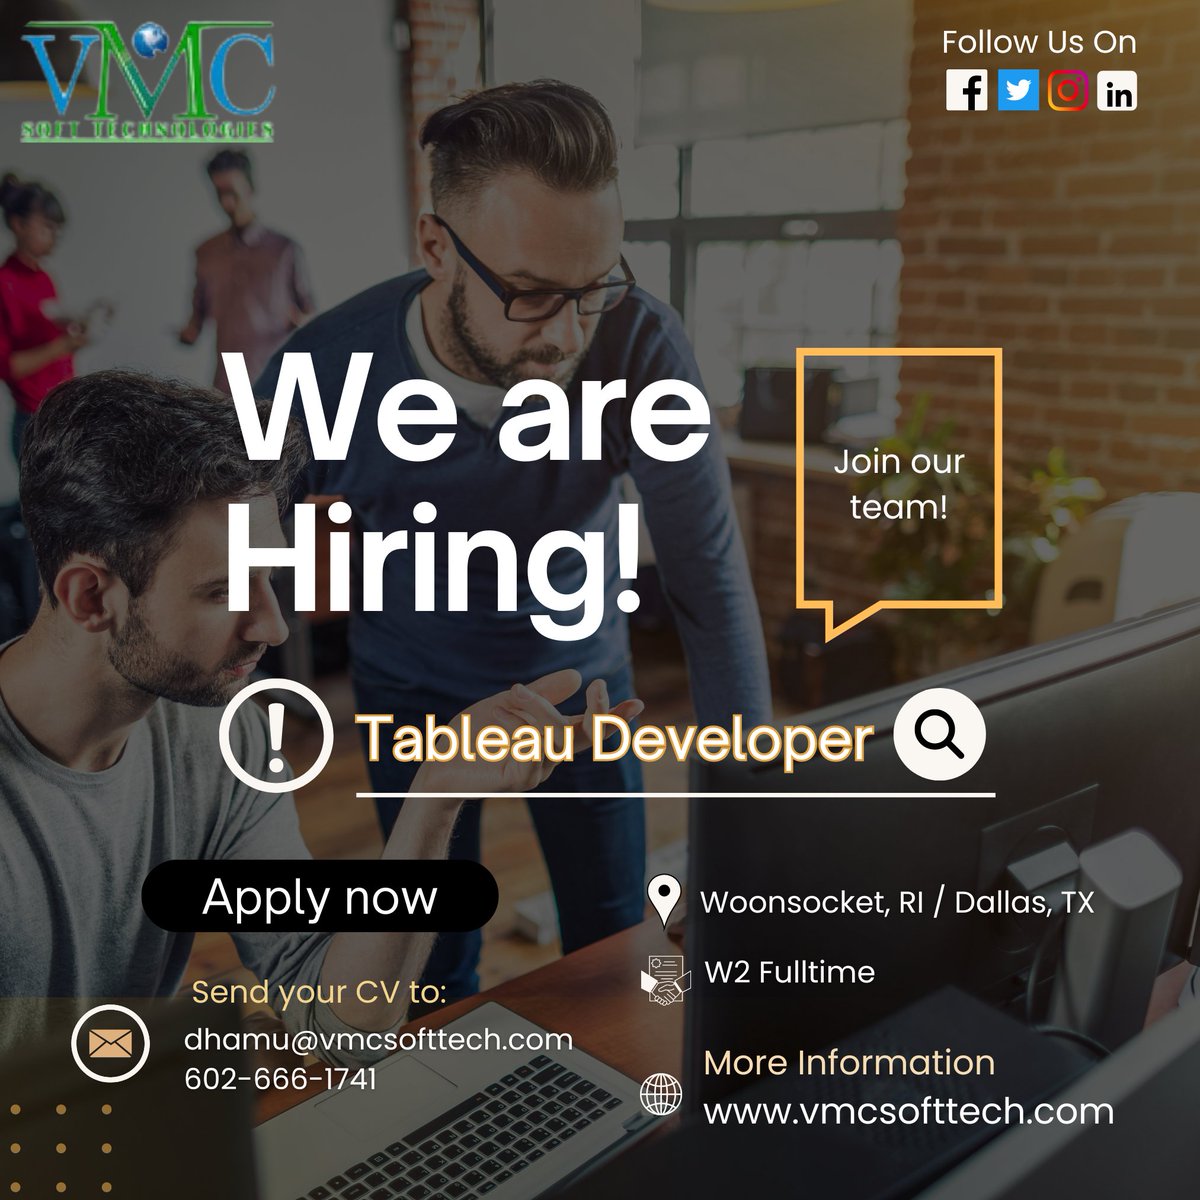 VMC Soft Technologies looking for a Tableau Developer in Woonsocket, RI / Dallas, TX Job Title: Tableau Developer Locations: Woonsocket, RI / Dallas, TX Contract: W2 Full-Time For more details: dhamu@vmcsofttech.com/ 602-666-1741 Apply Now: vmcsofttech.com/careers/